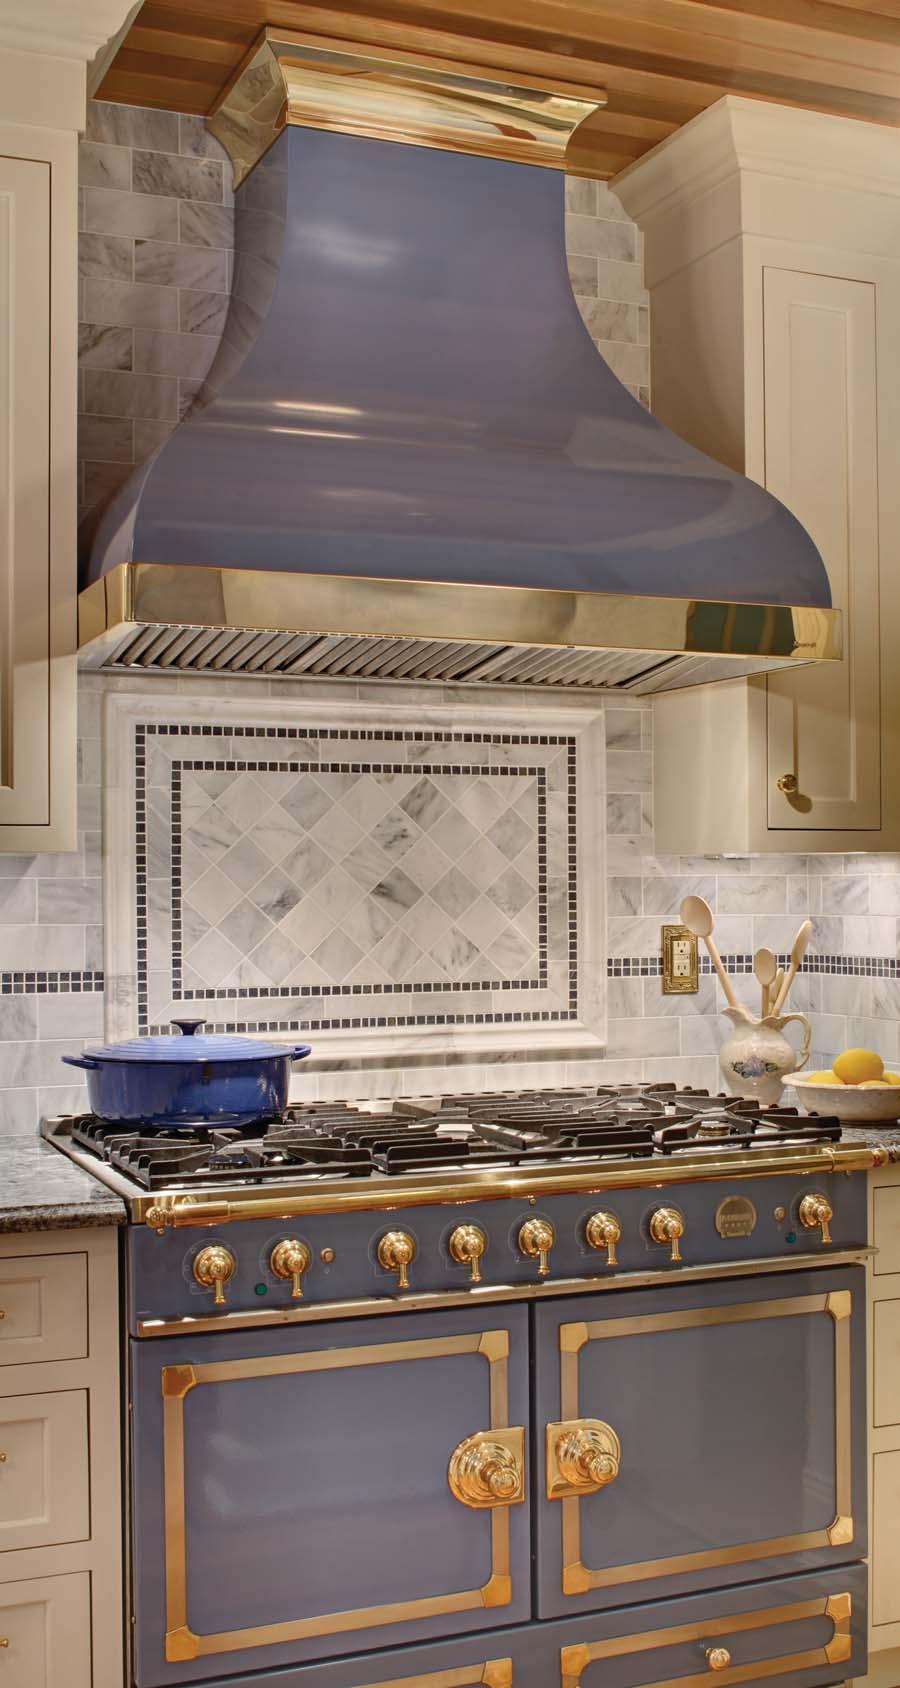 Since 1972, RangeCraft has been a leading industry manufacturer of metal range hoods. RangeCraft specializes in high quality, custom designed hoods while offering a variety of classic designs.